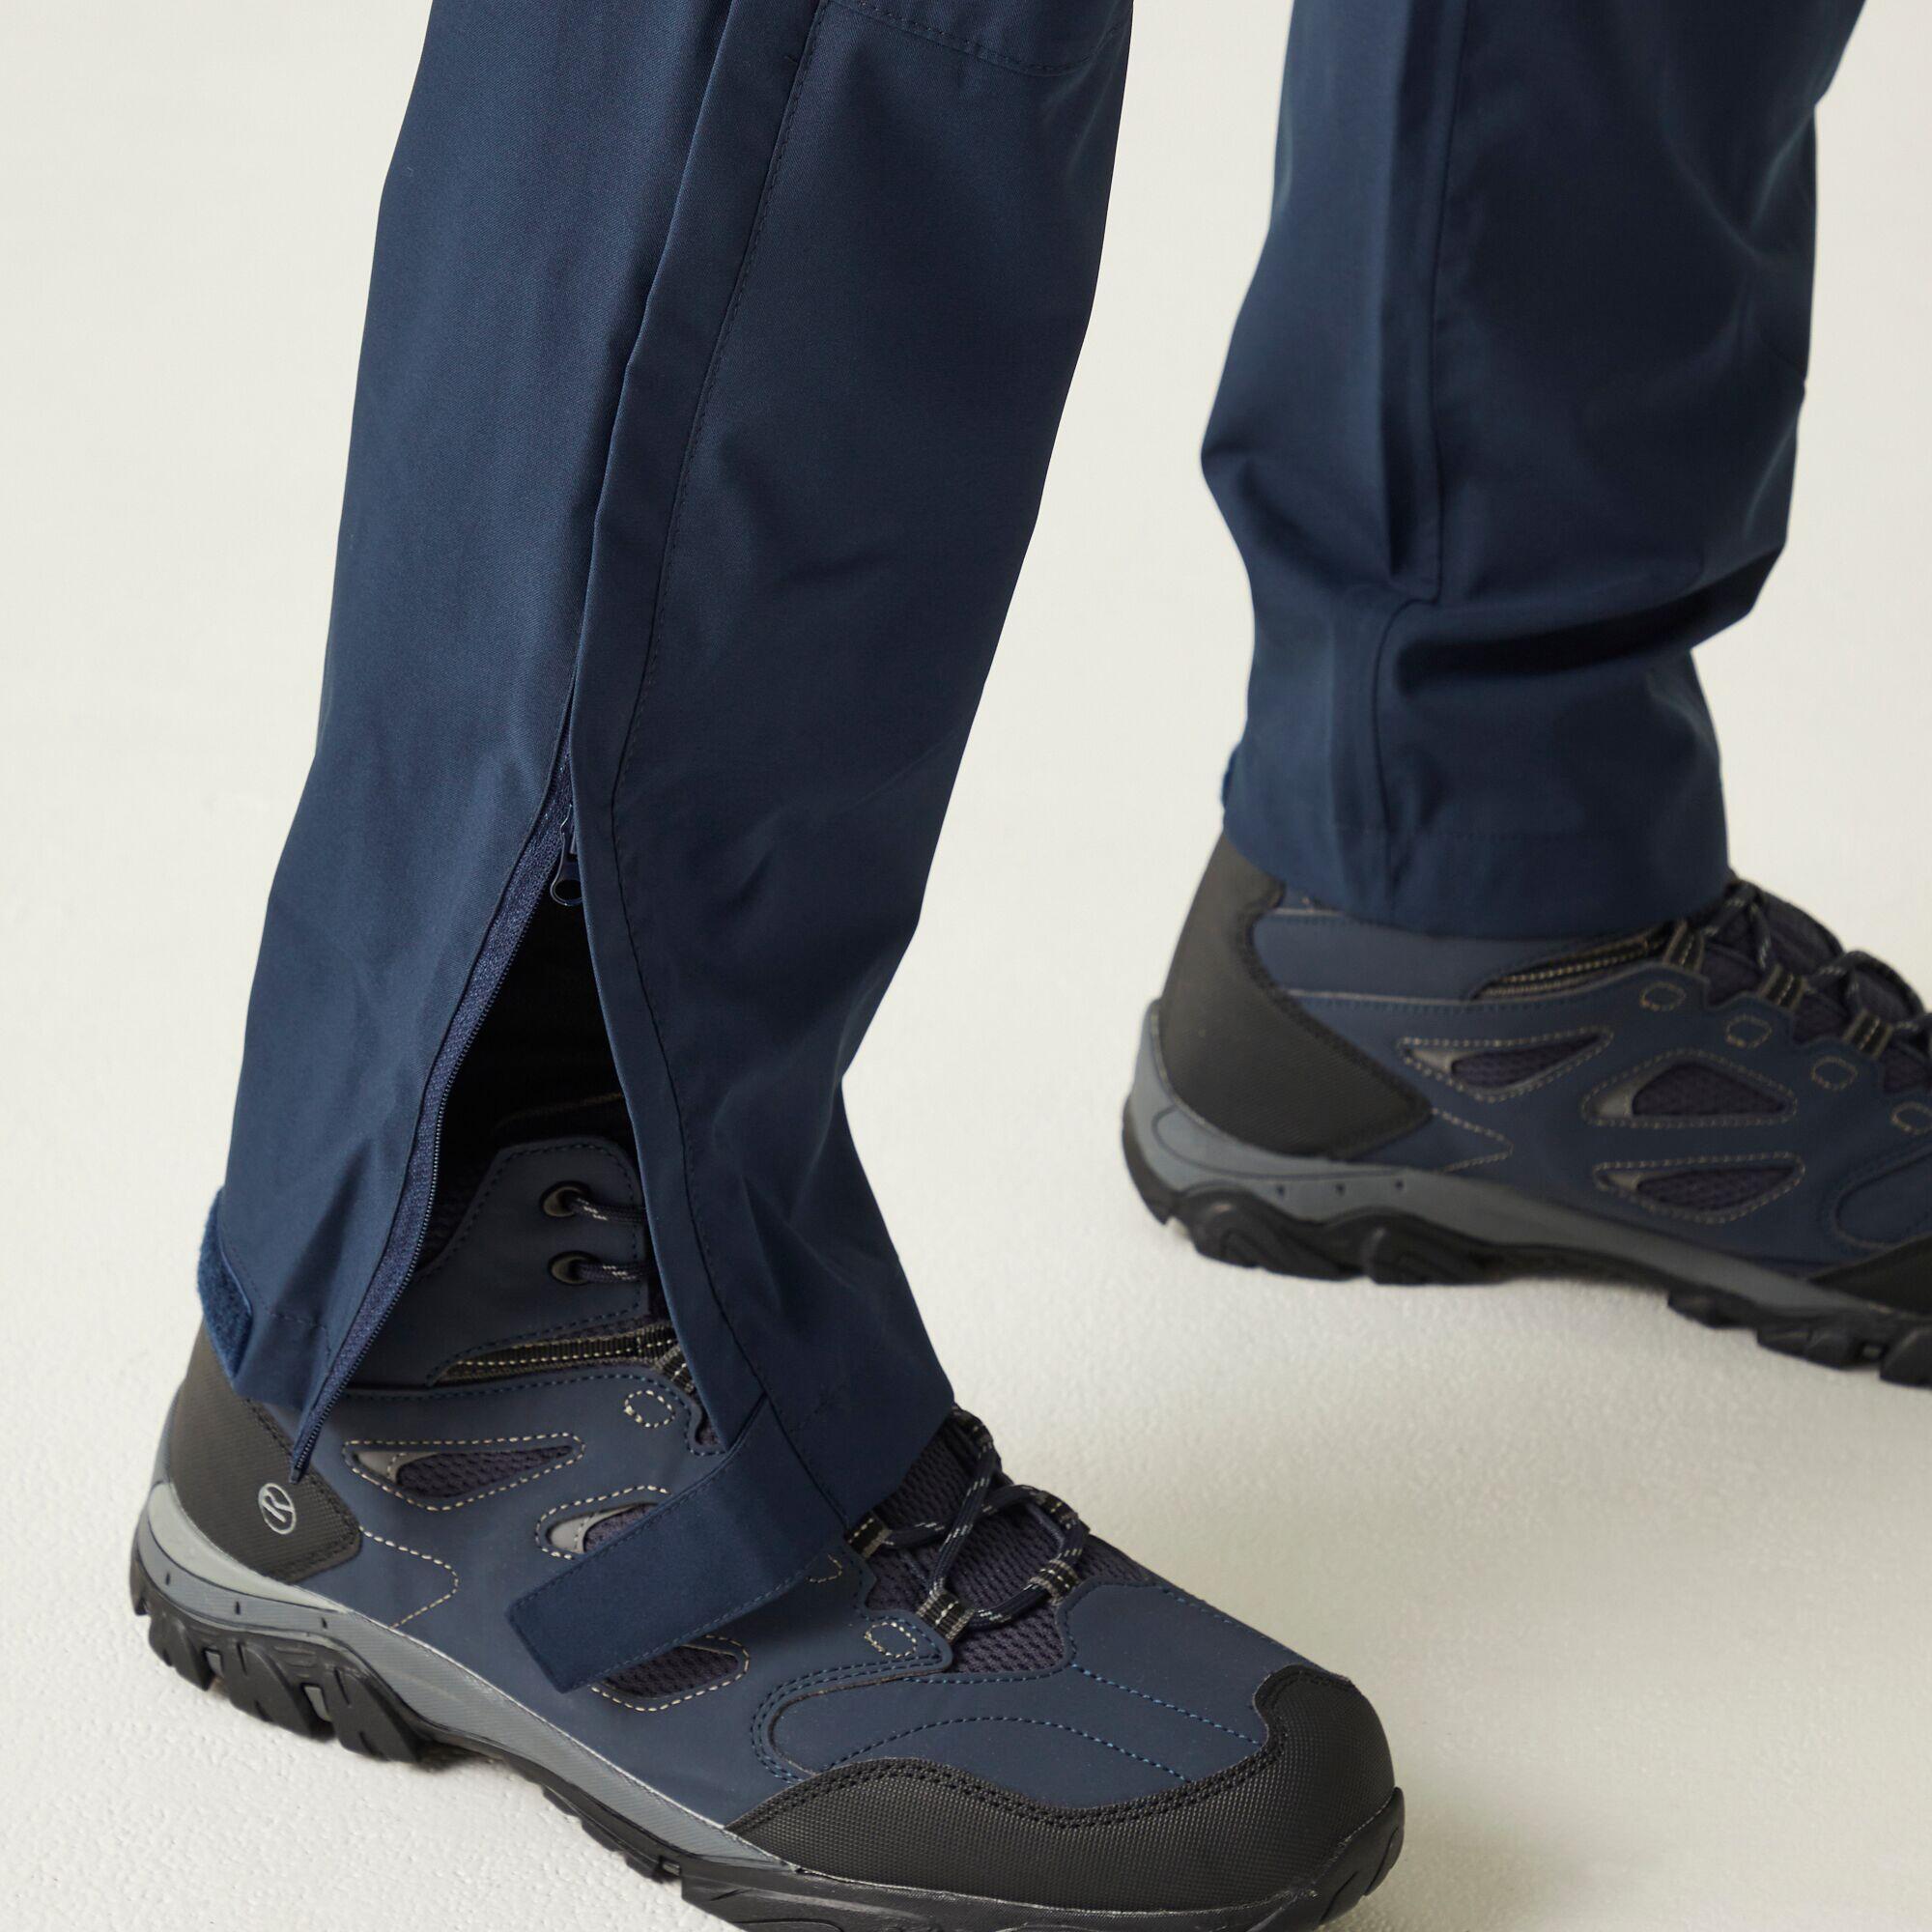 Highton Stretch Men's Hiking Overtrousers - Navy 4/5